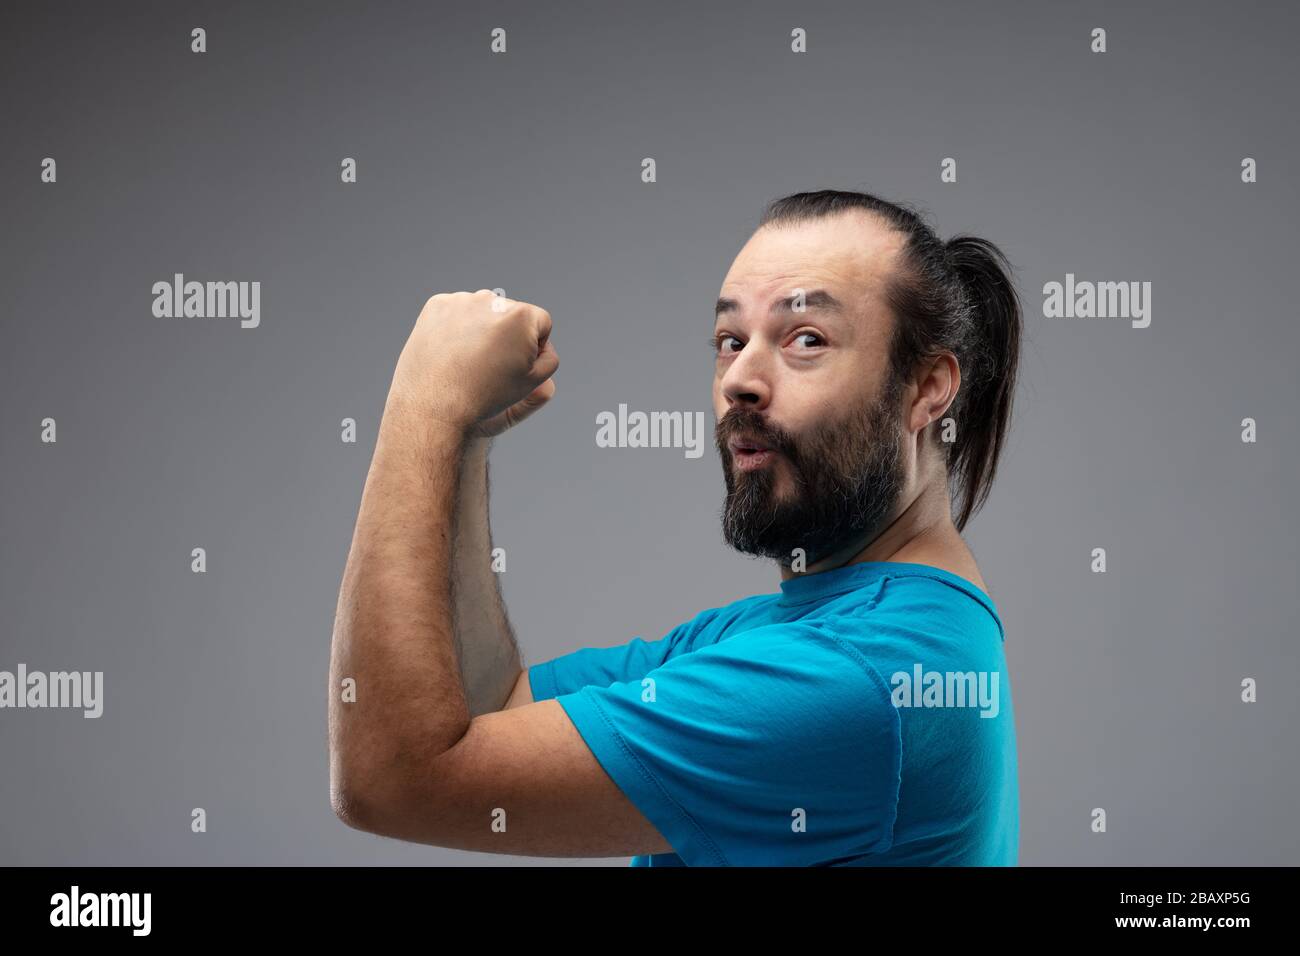 Happy looking bearded man in blue t-shirt and with combed long black hair, expressing winning gesture with his hands up and fists clenched. Close-up s Stock Photo